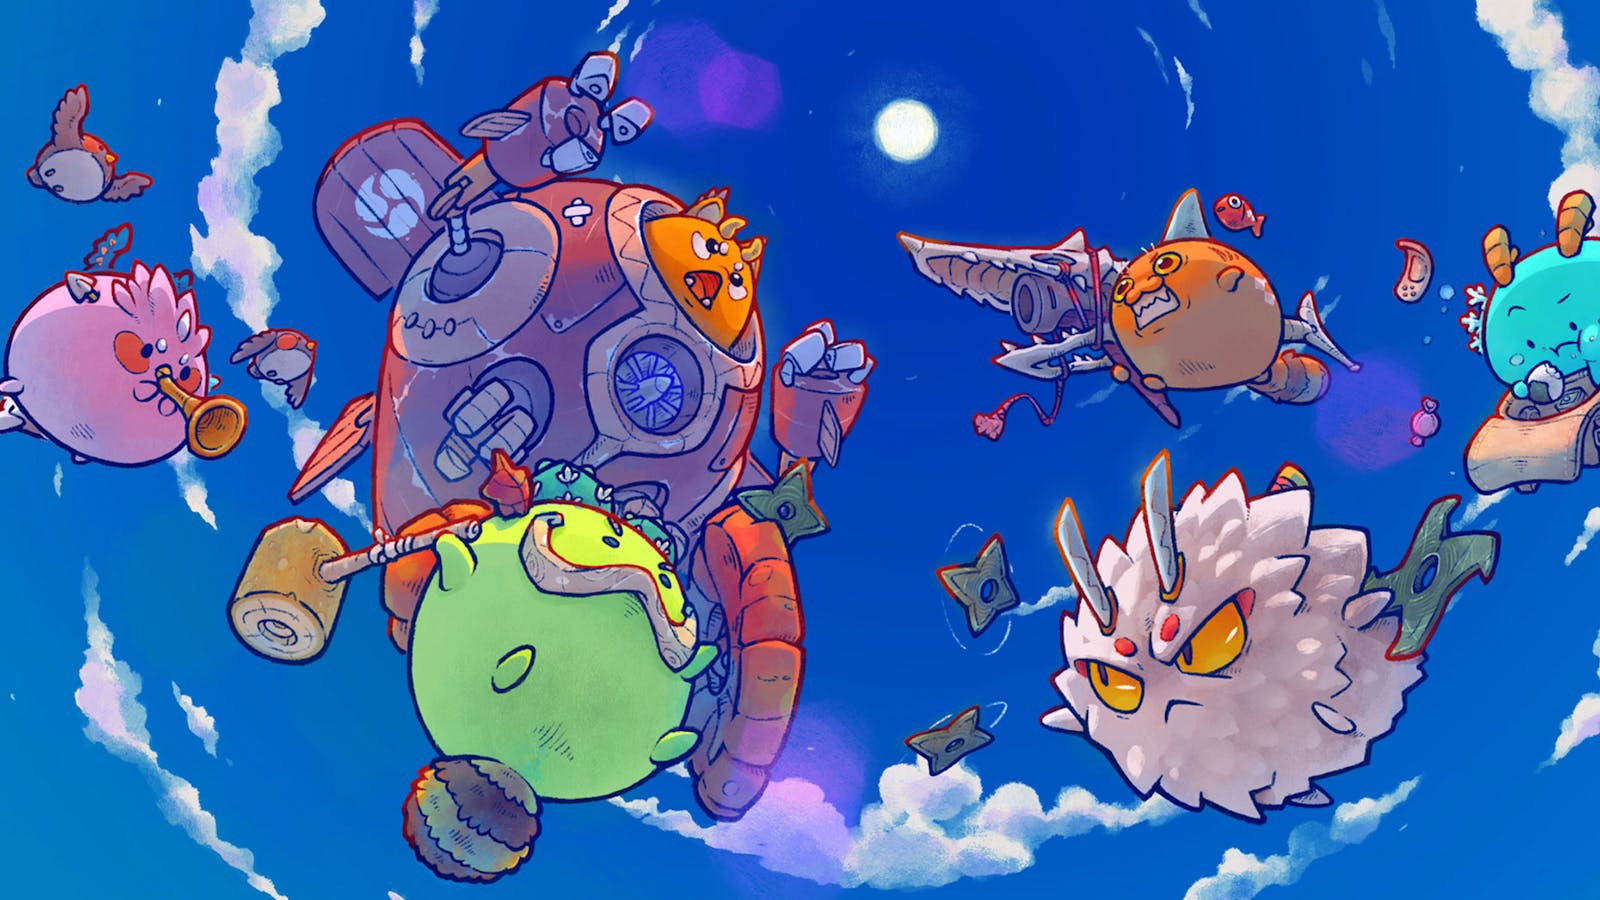 Art from the Axie Infinity NFT game. Photo: Axie Infinity